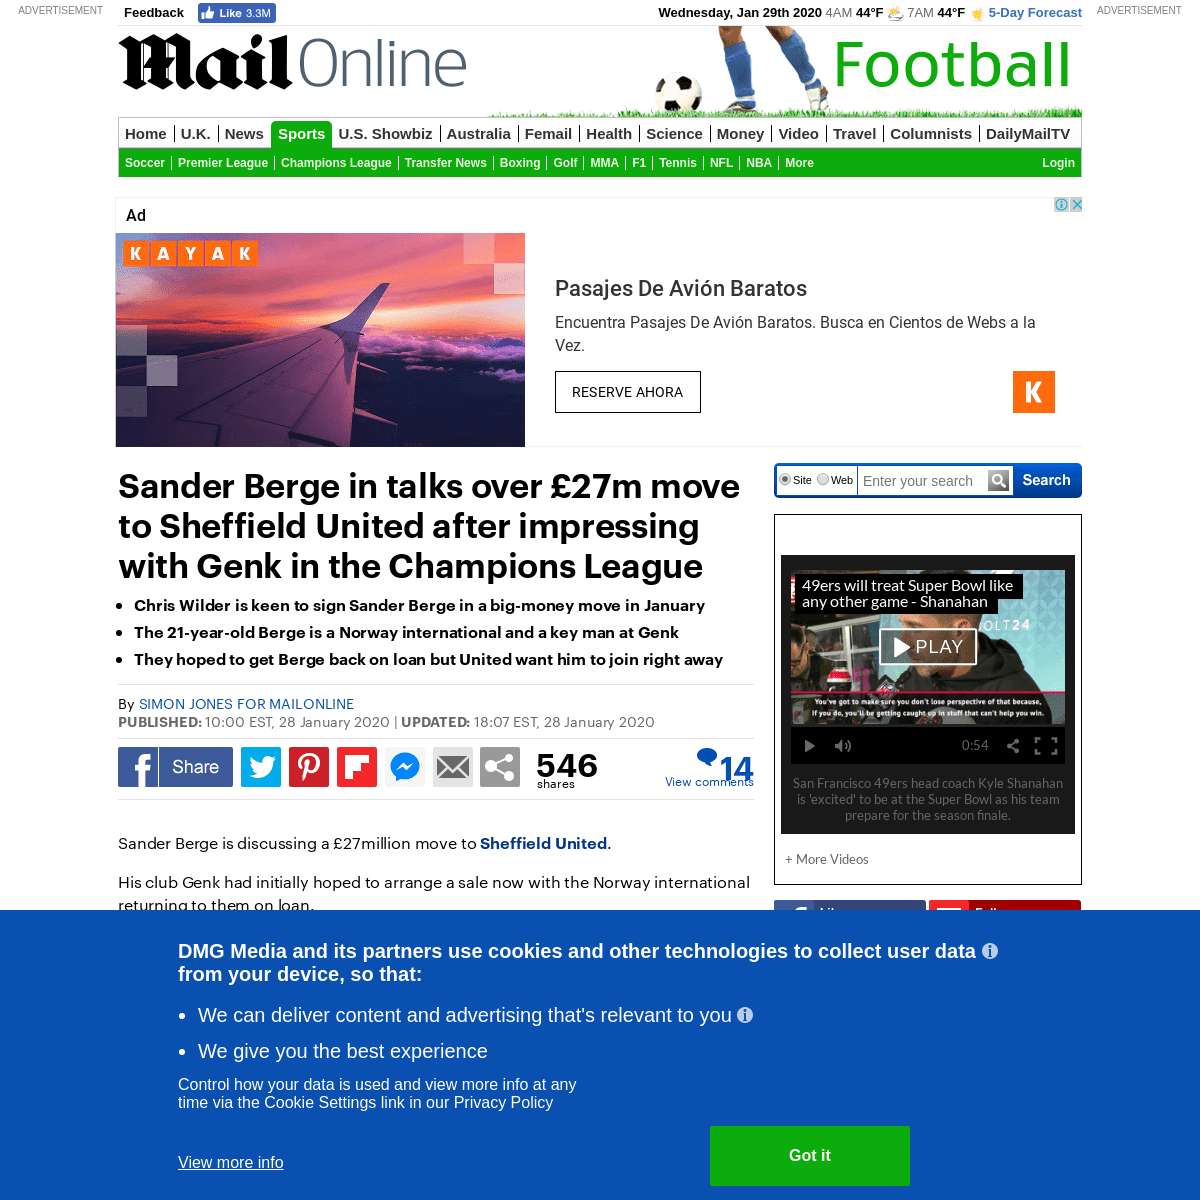 A complete backup of www.dailymail.co.uk/sport/football/article-7938745/Sander-Berge-talks-27m-Sheffield-United.html